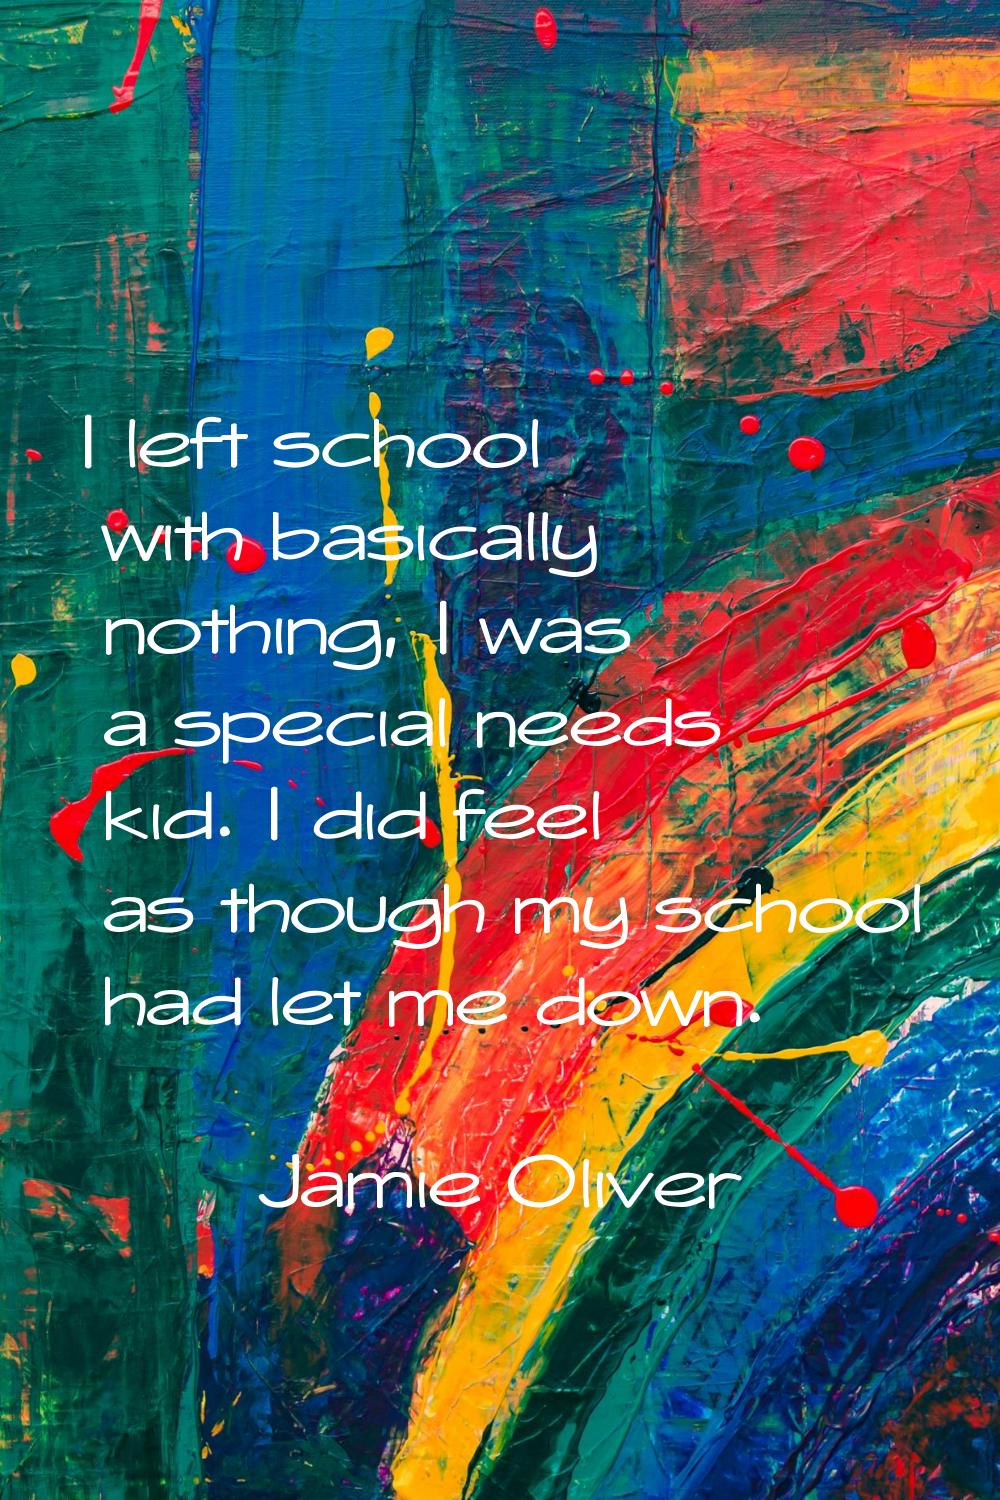 I left school with basically nothing, I was a special needs kid. I did feel as though my school had